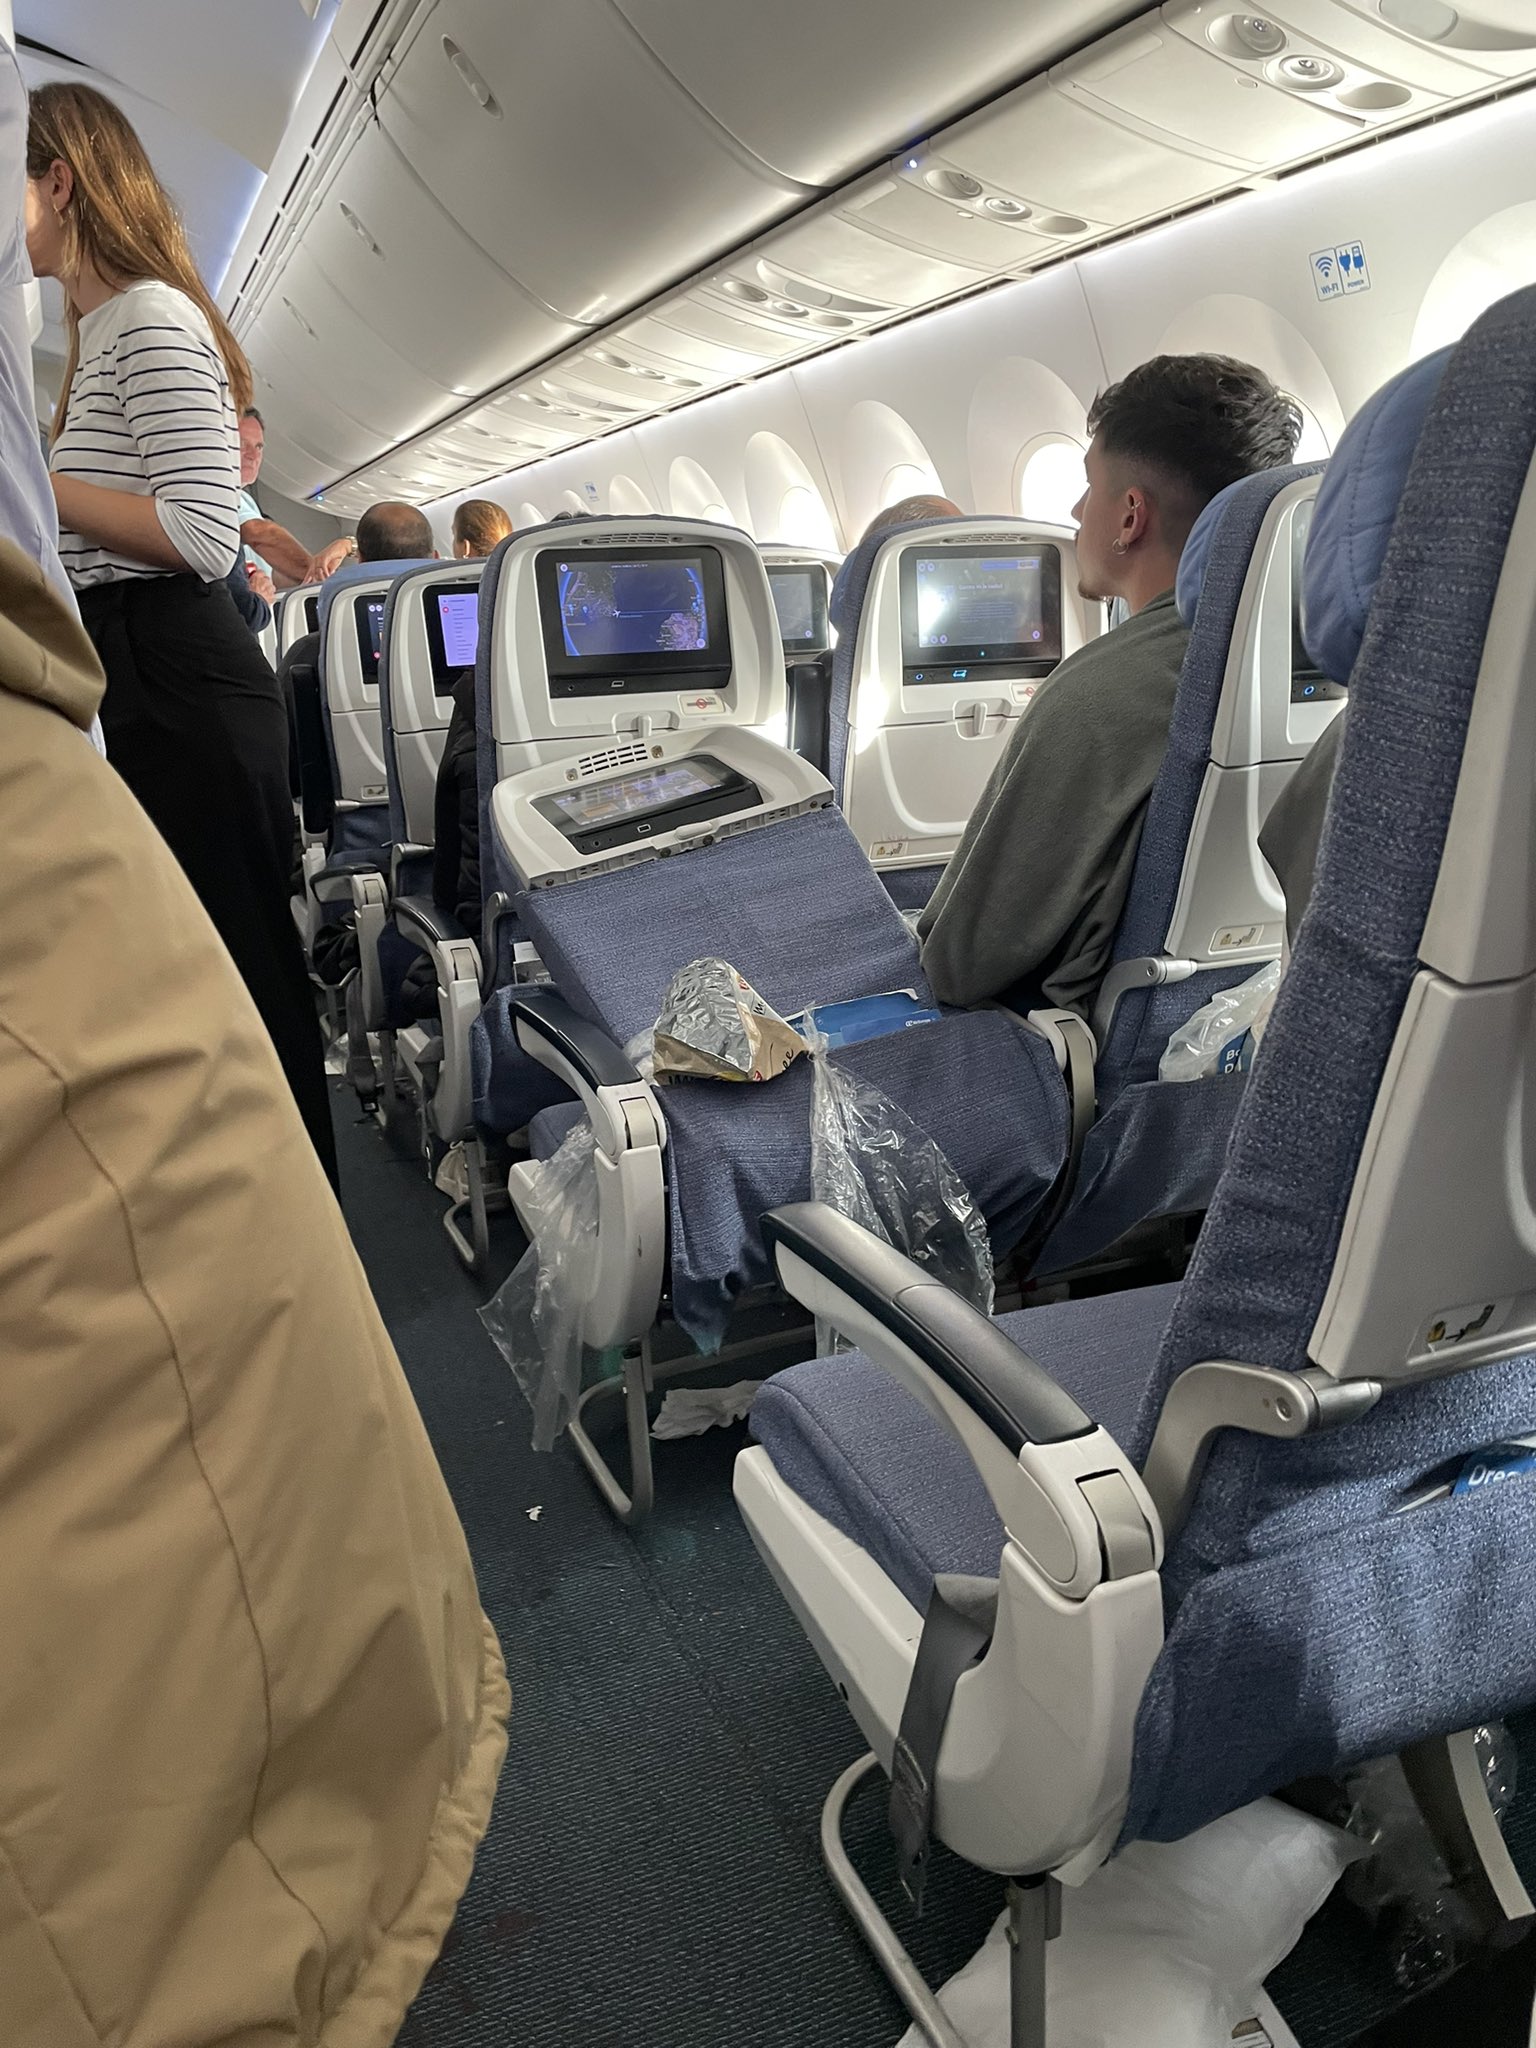 A seat was severely damaged in the turbulence